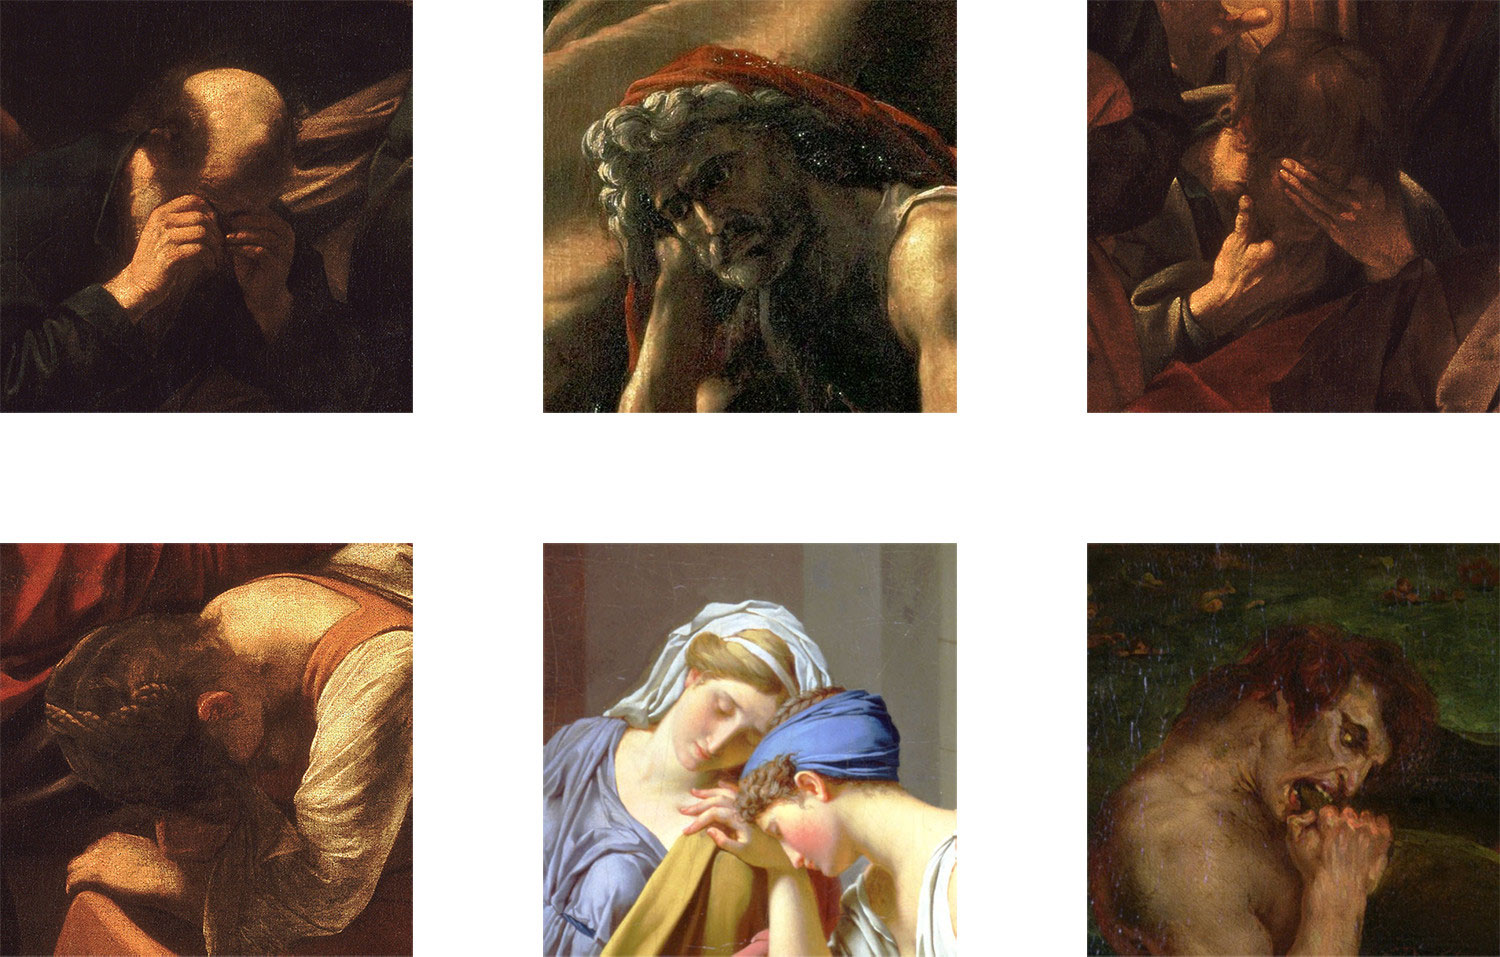 Paintings at the Louvre depicting sad expressions